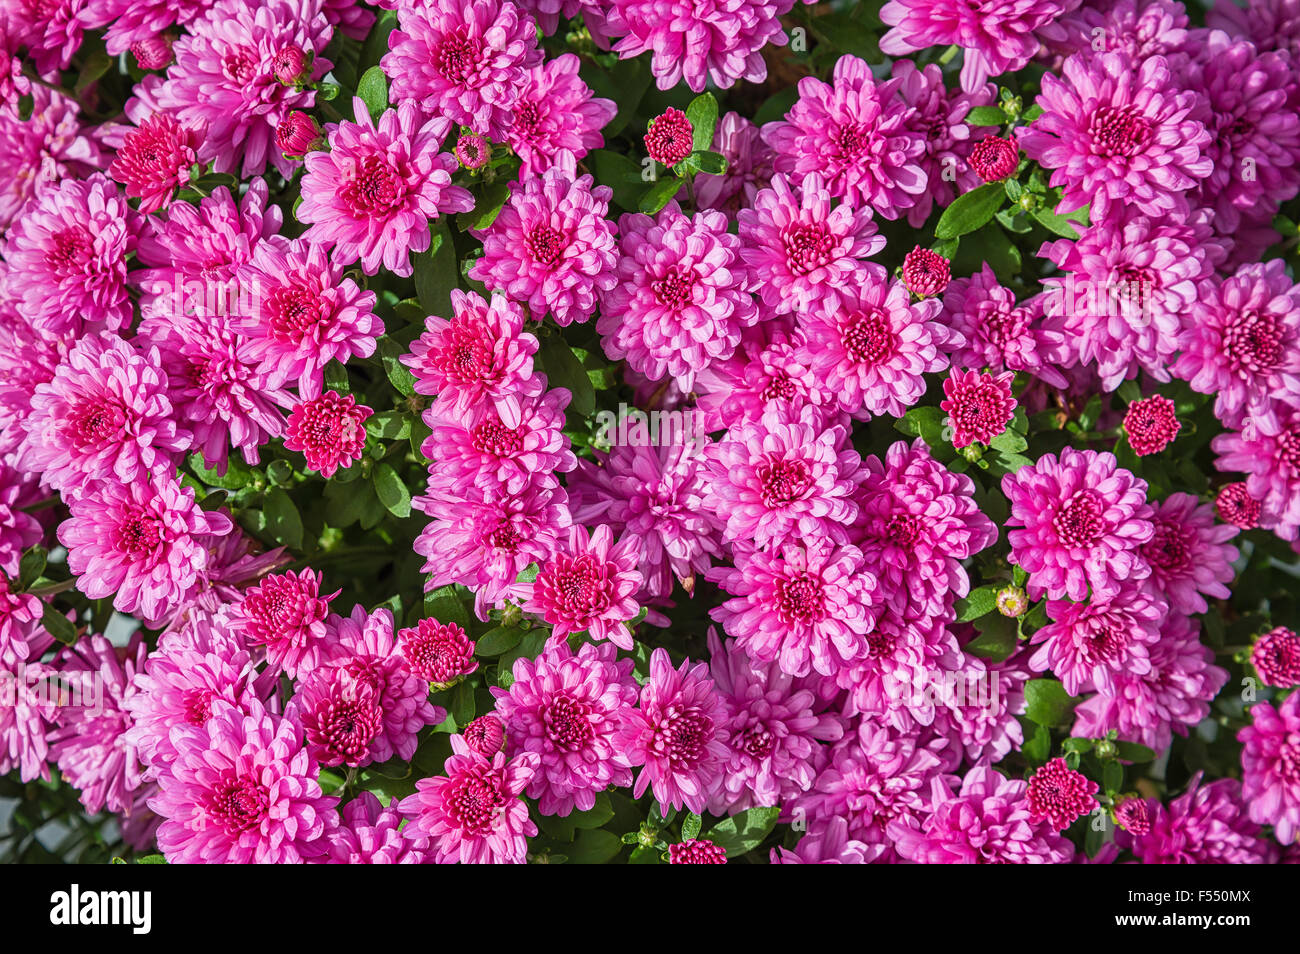 Bright pink Mums or Chrysanthemums flower background Stock Photo - Alamy